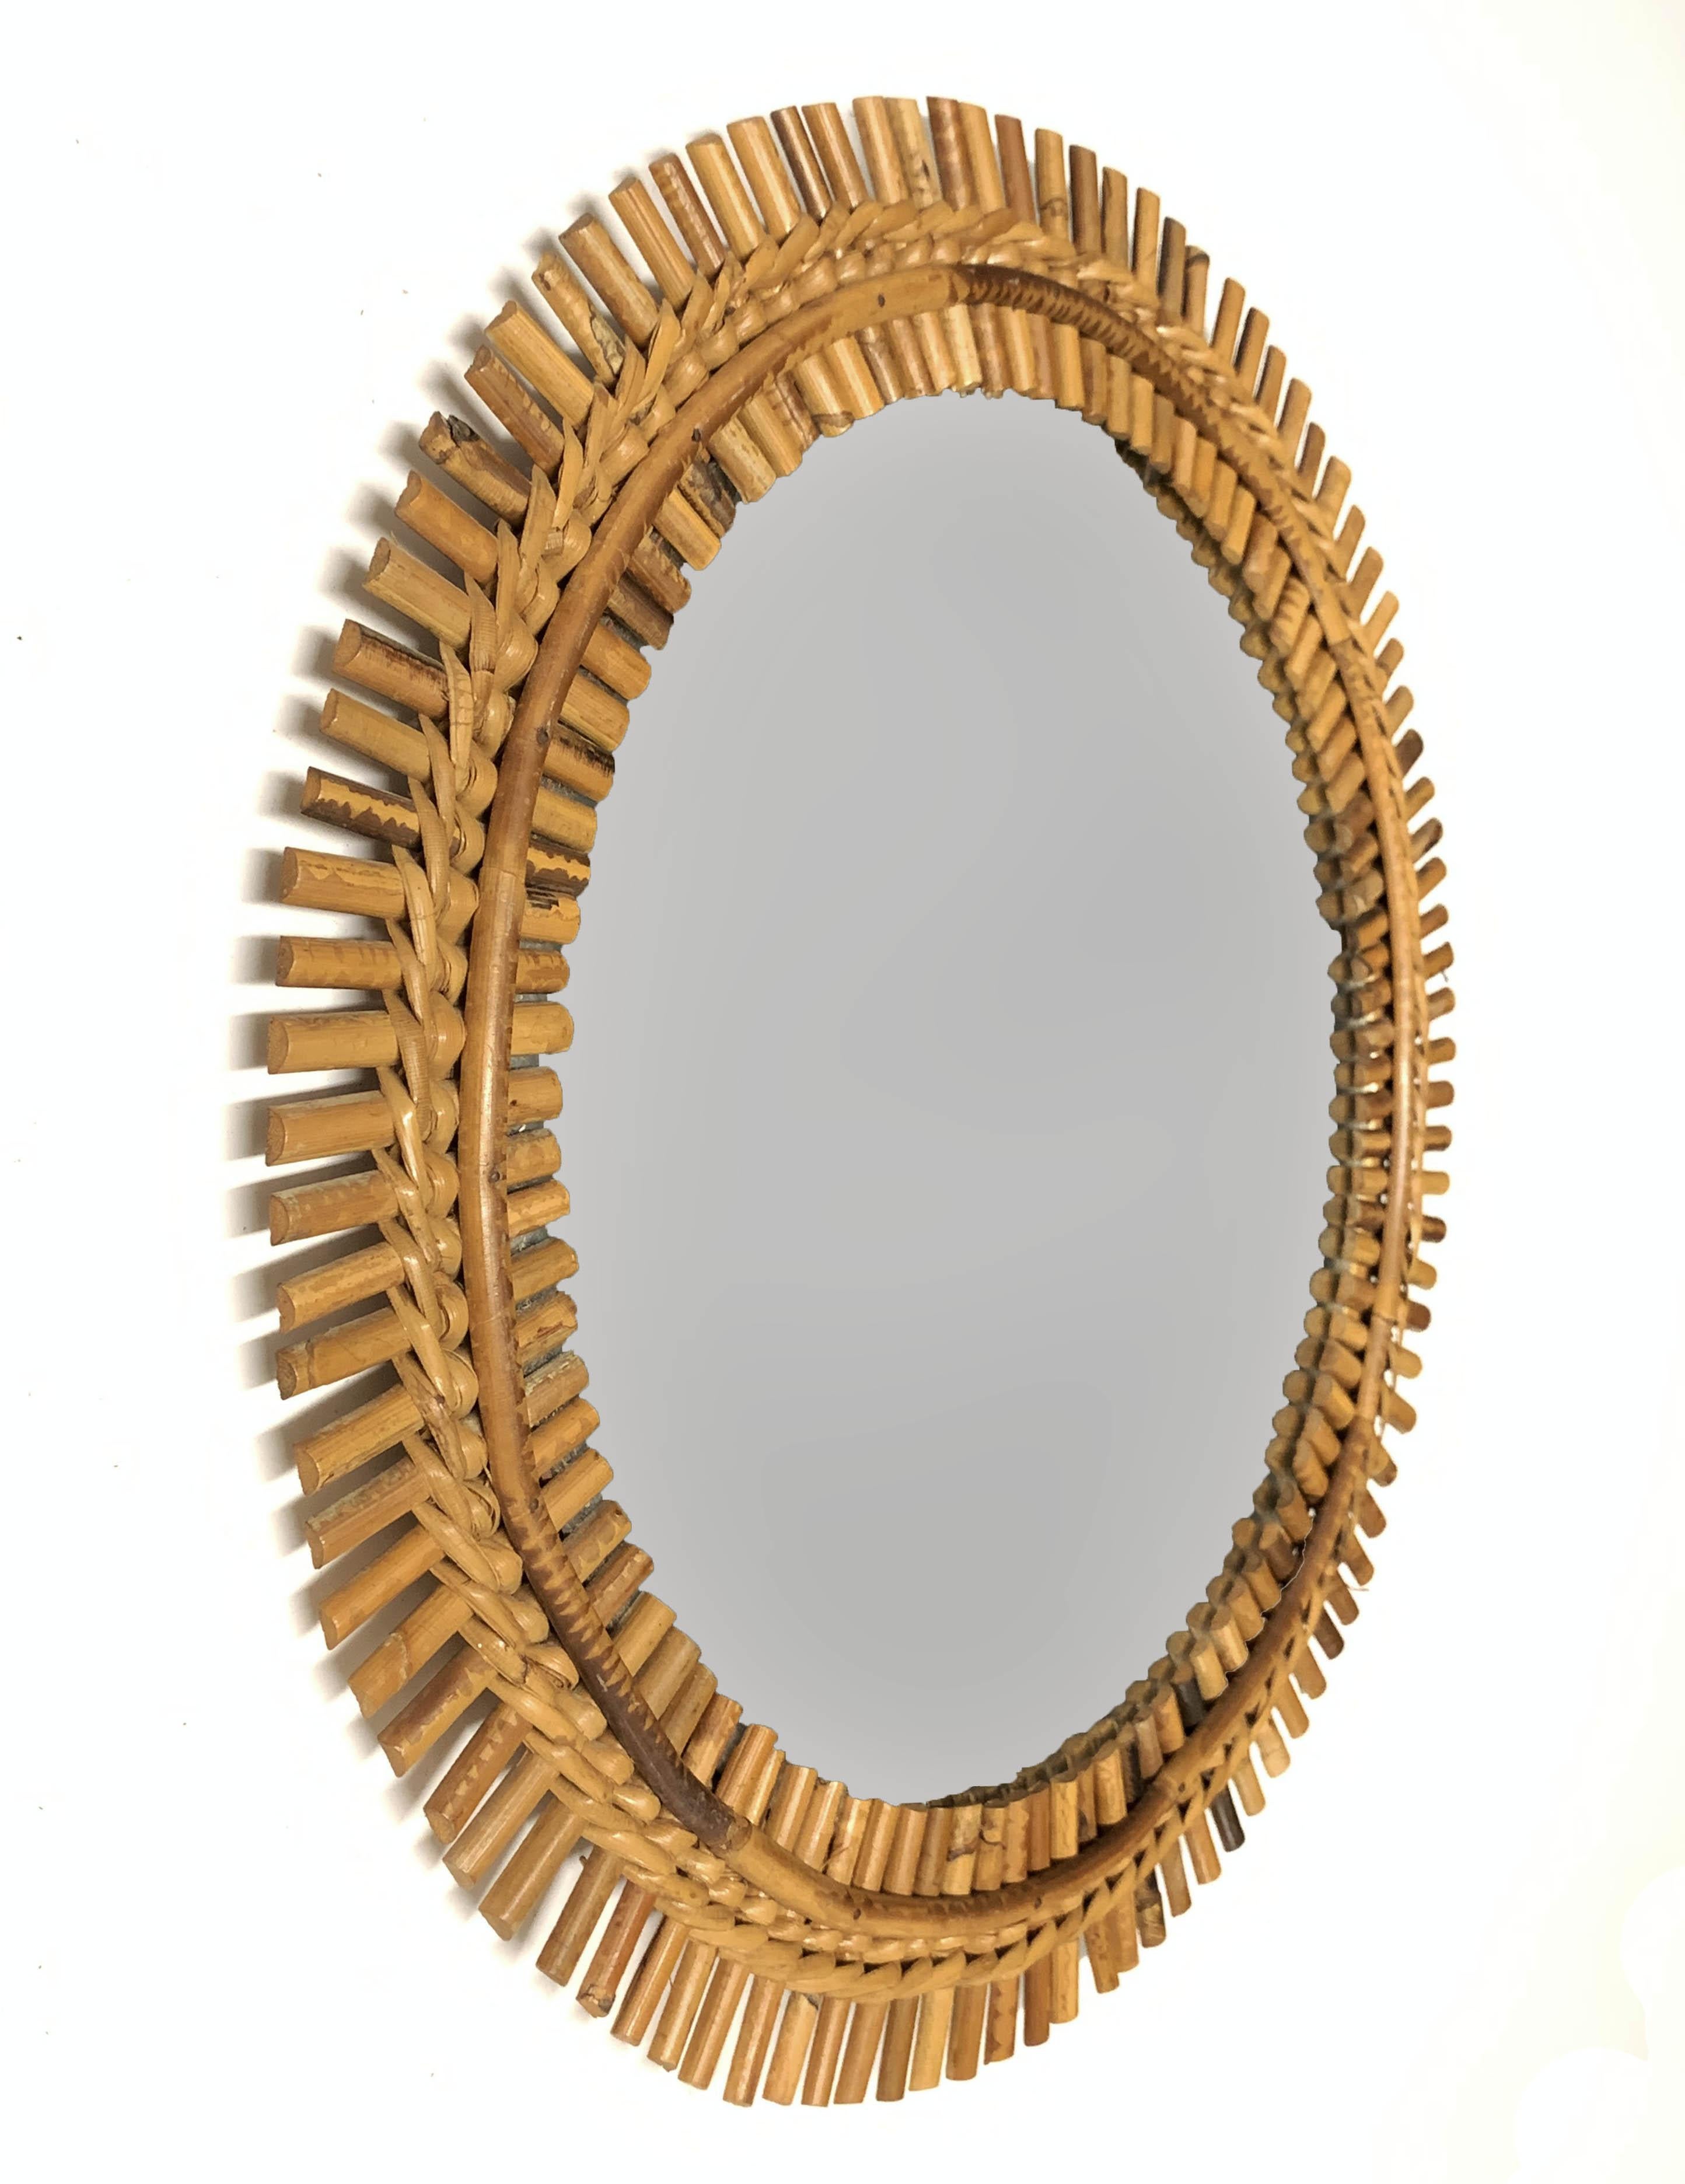 Cote d'Azur round wall mirror with a bamboo and rattan frame, produced in France during 1960s.

This amazing mirror is in its original, good conditions. It has the unmistakable design of the 1960s and will, with its elegance, remind the breeze of